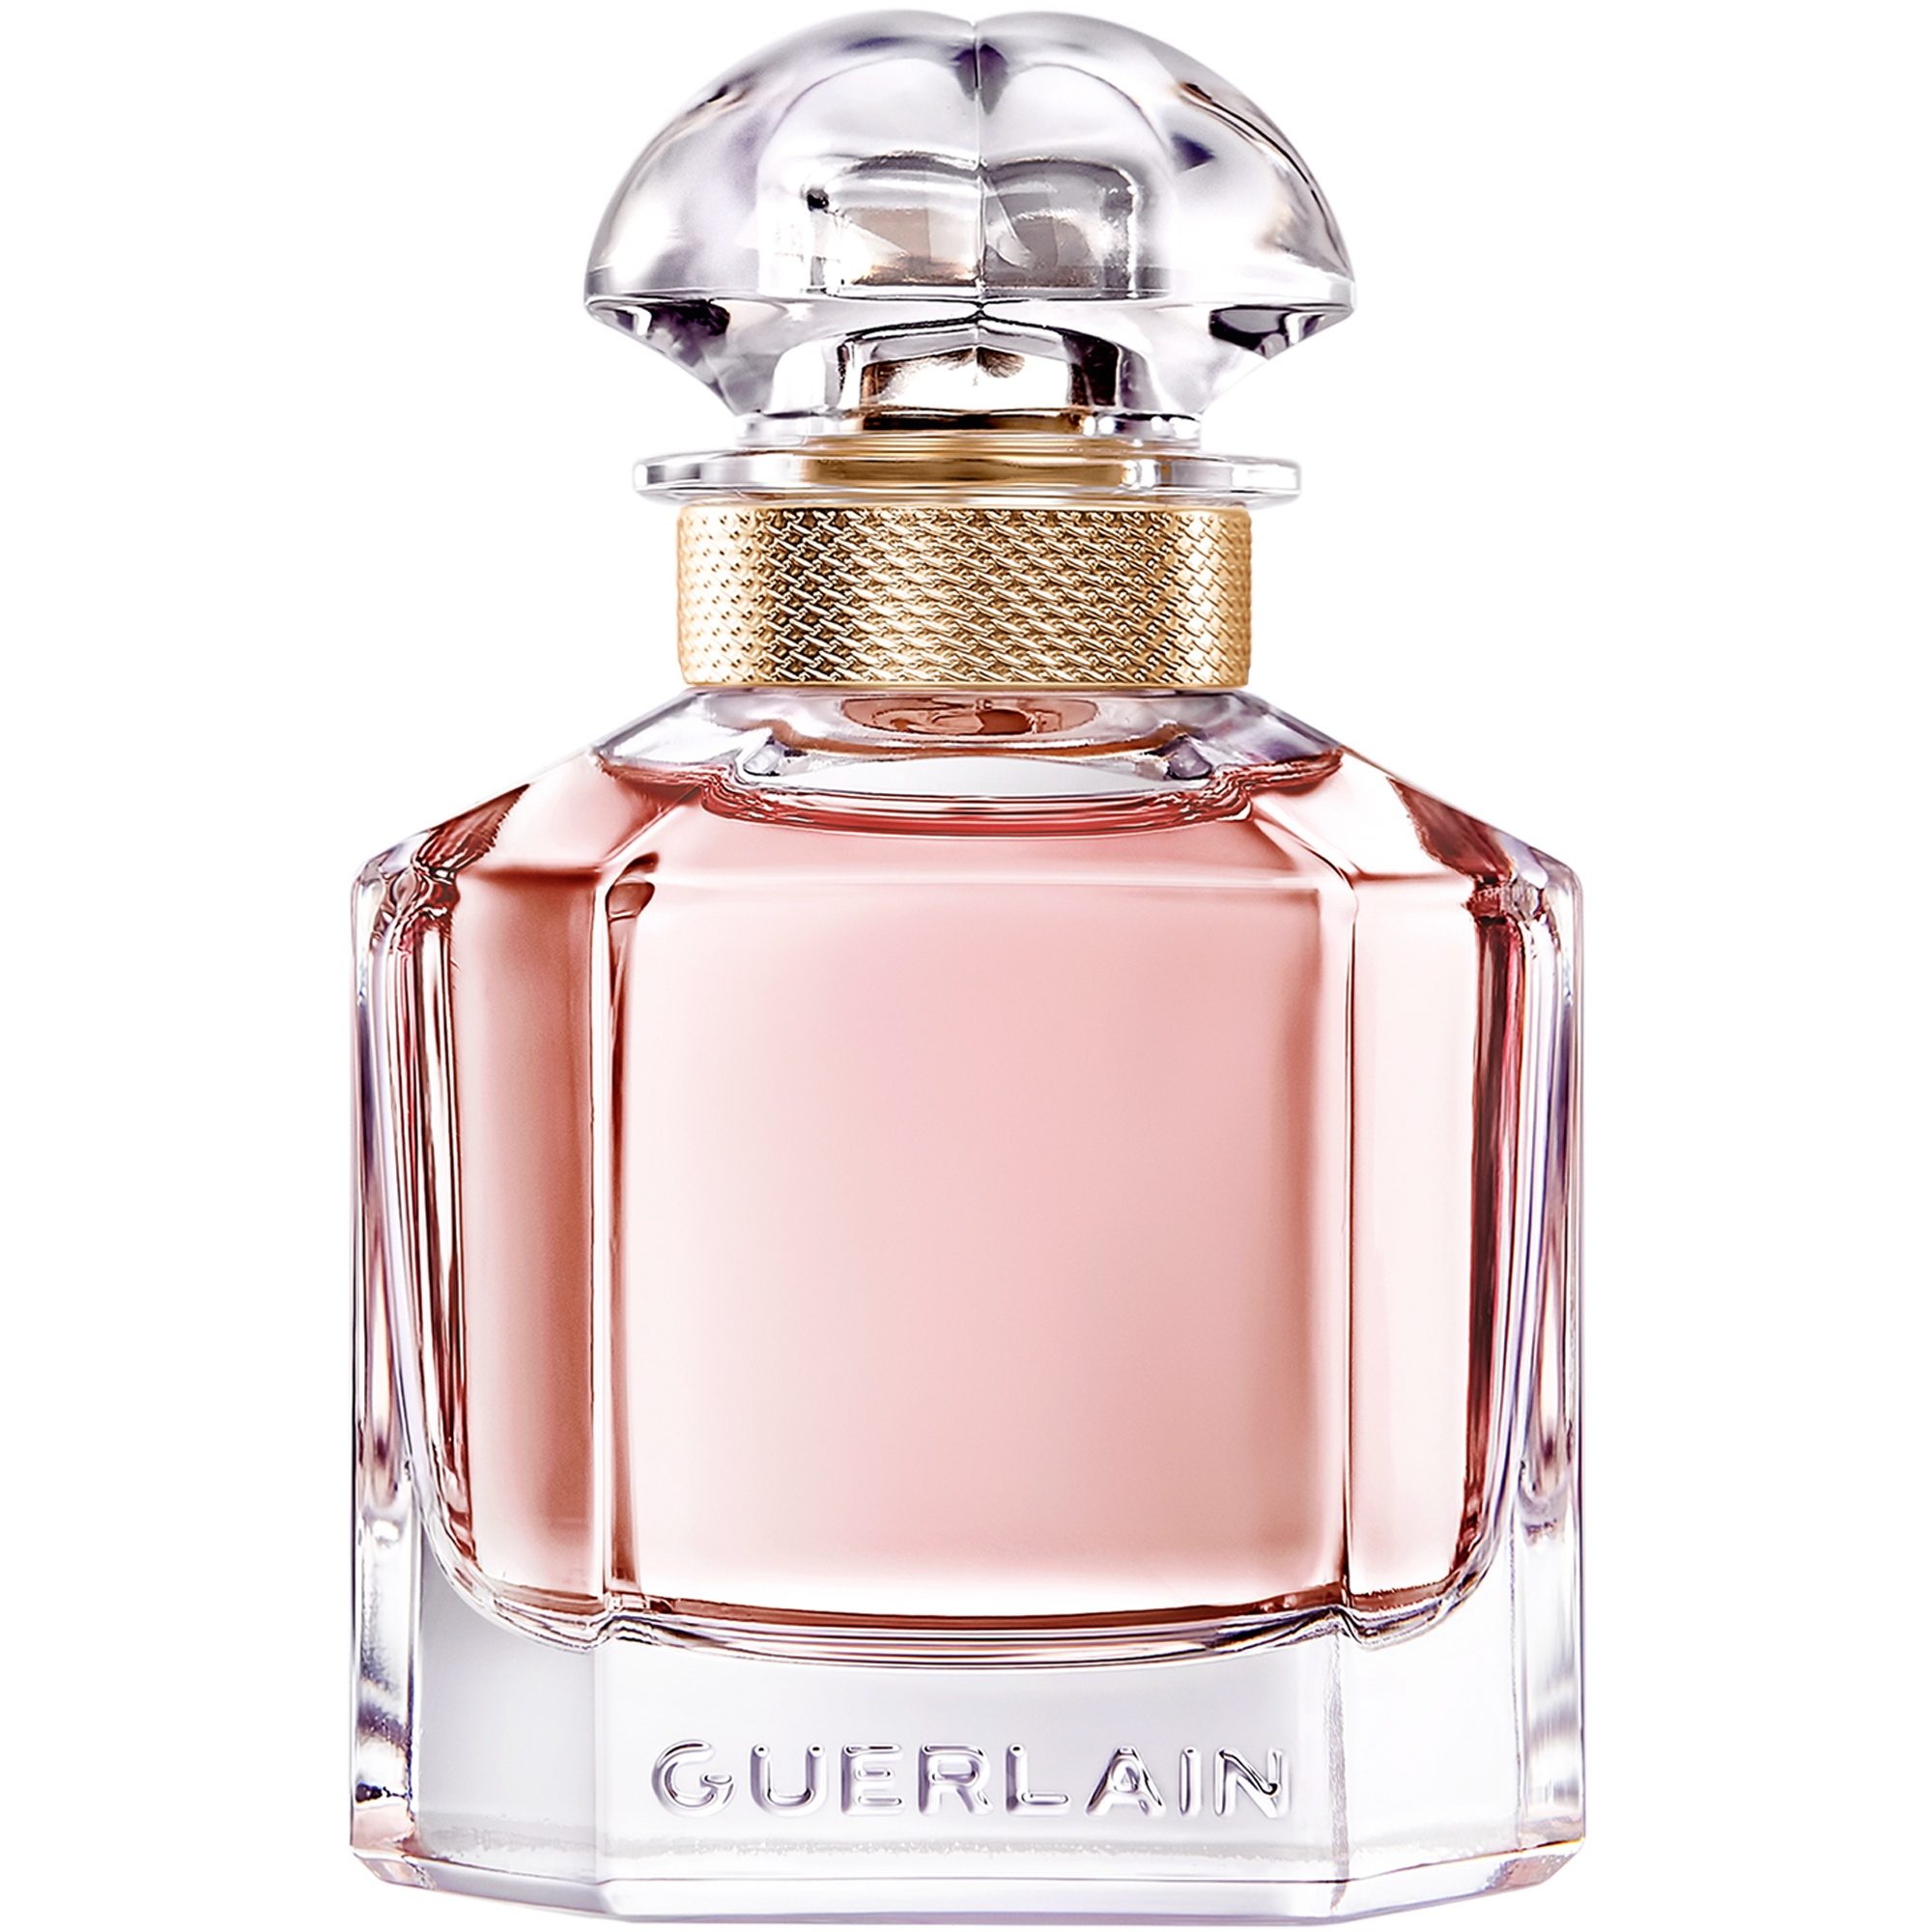 Transparent Perfume PNG Images, Perfume Bottle, Chanel Perfume, Logo And  Spray Images - Free Transparent PNG Logos